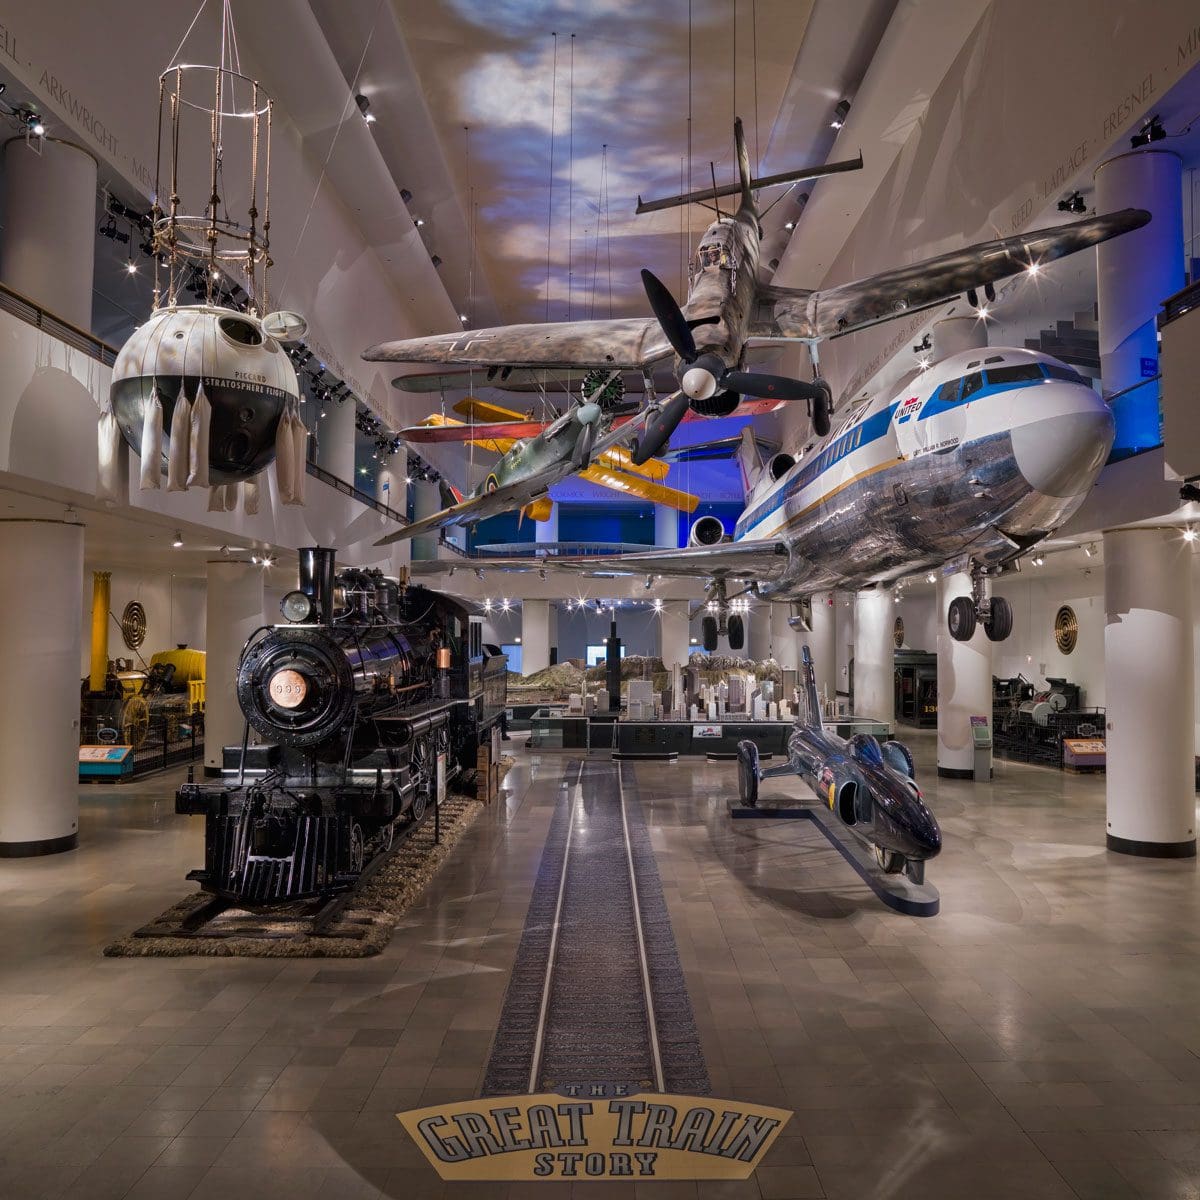 Inside one of the transportation exhibits at Museum of Science and Industry.